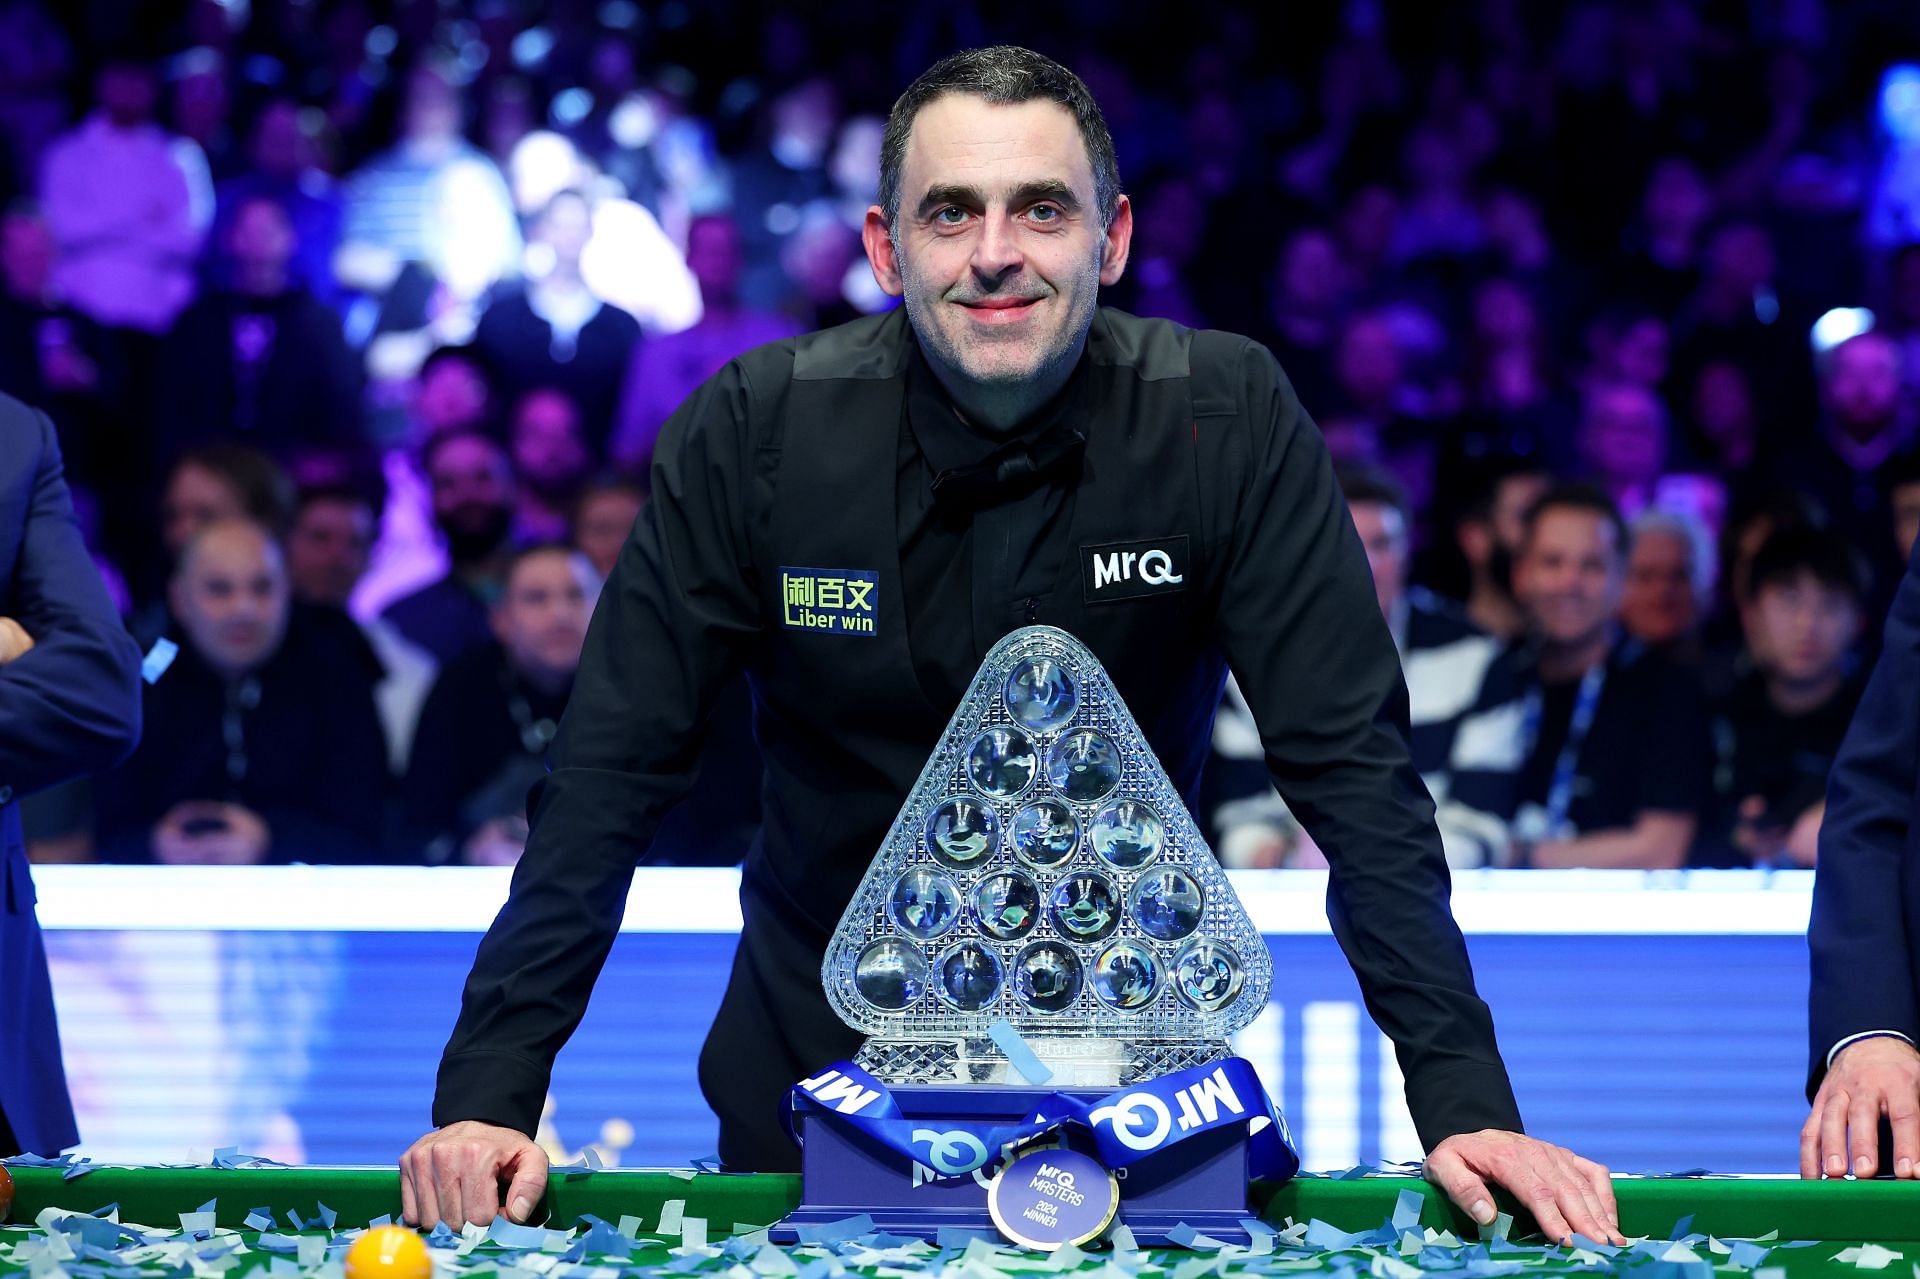 "He needs to sort his f***ing life out" Ronnie O'Sullivan's rant